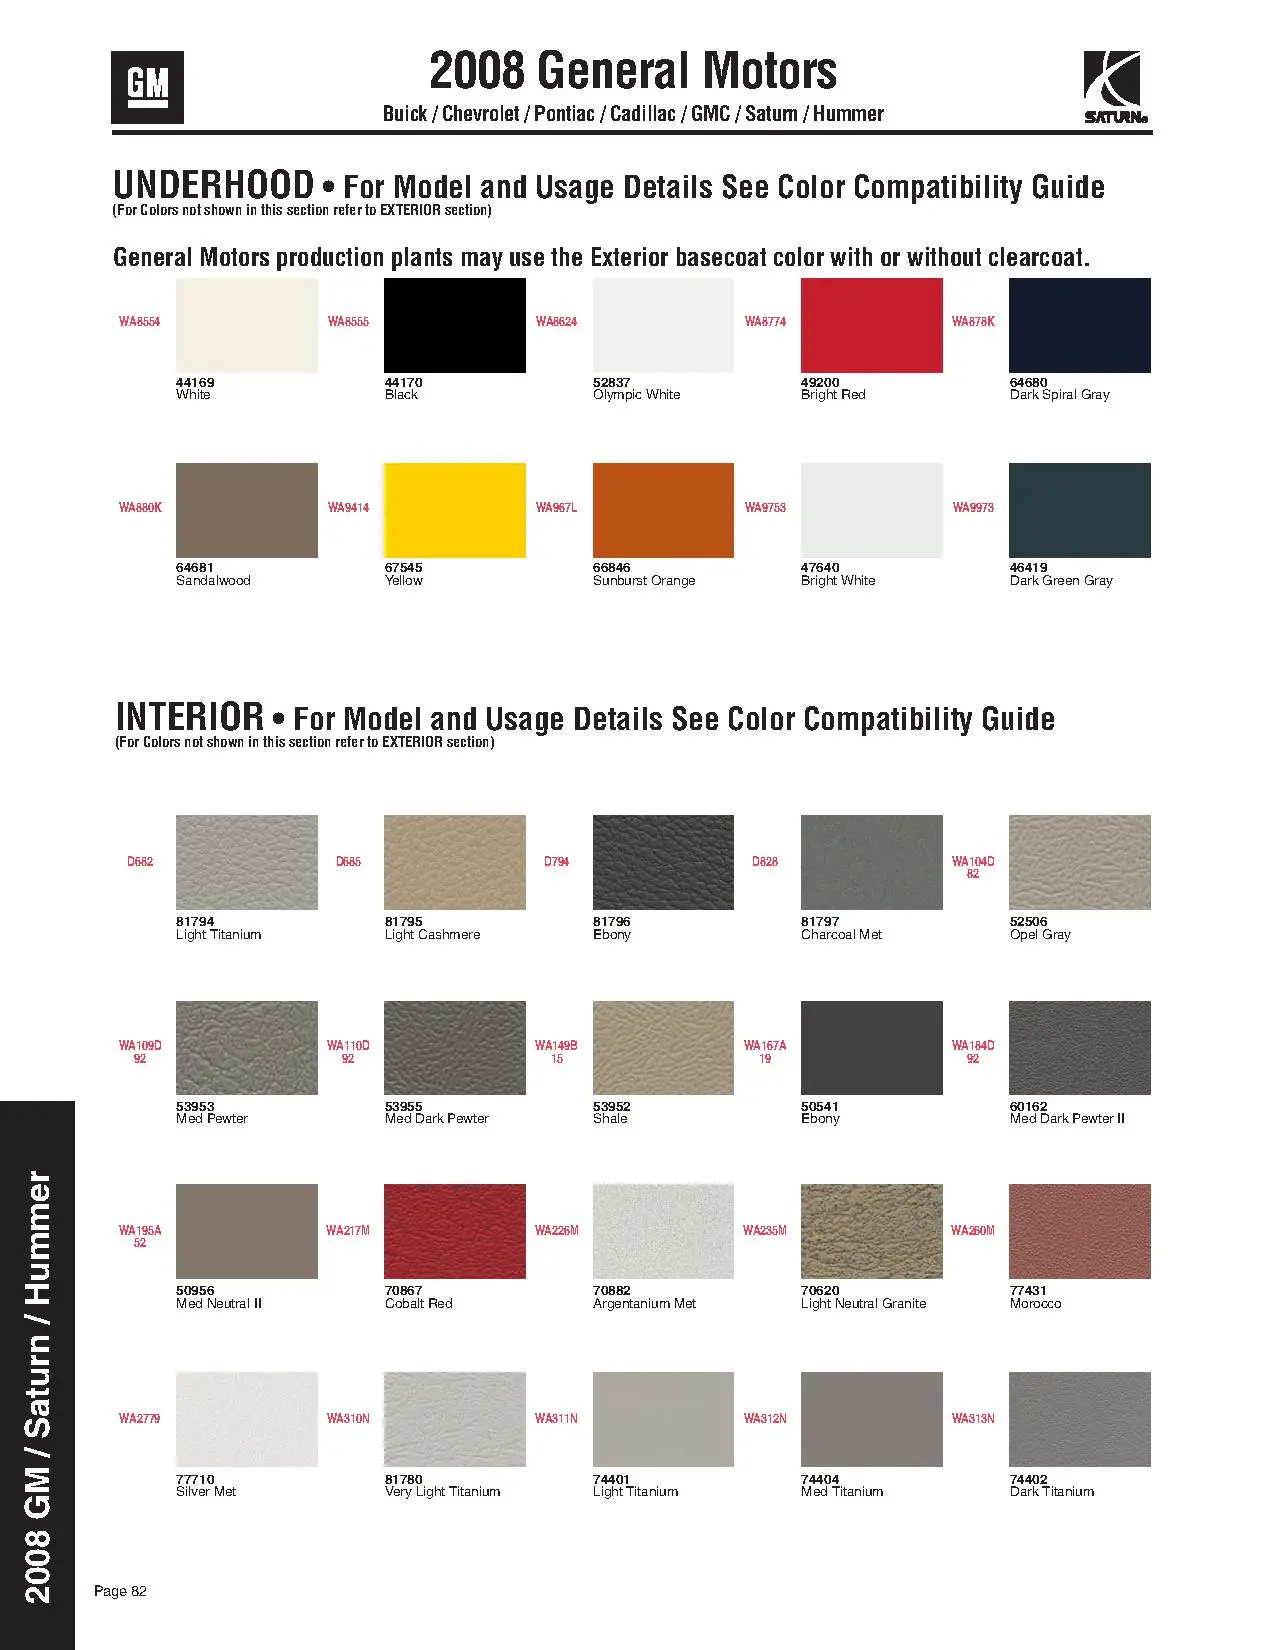 2008 Buick, Cadillac, Chevrolet, GMC, Hummer, Saturn, & Pontiac Vehicle paint codes and their examples of paint swatches